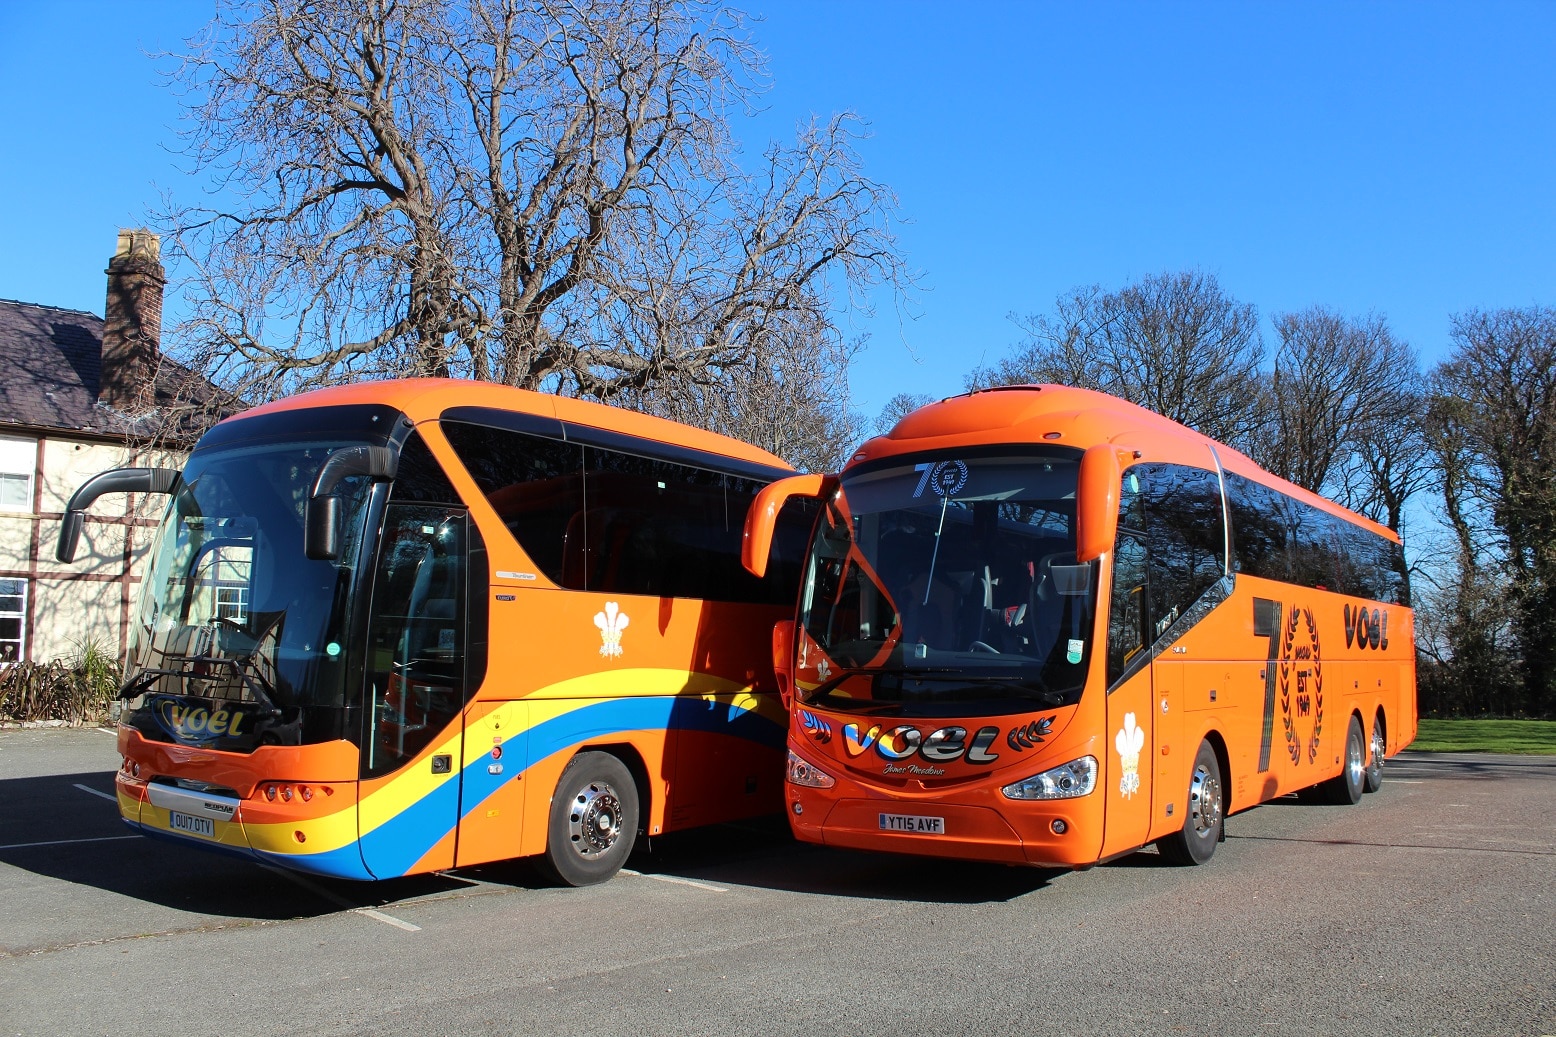 Voel Coaches 70 years